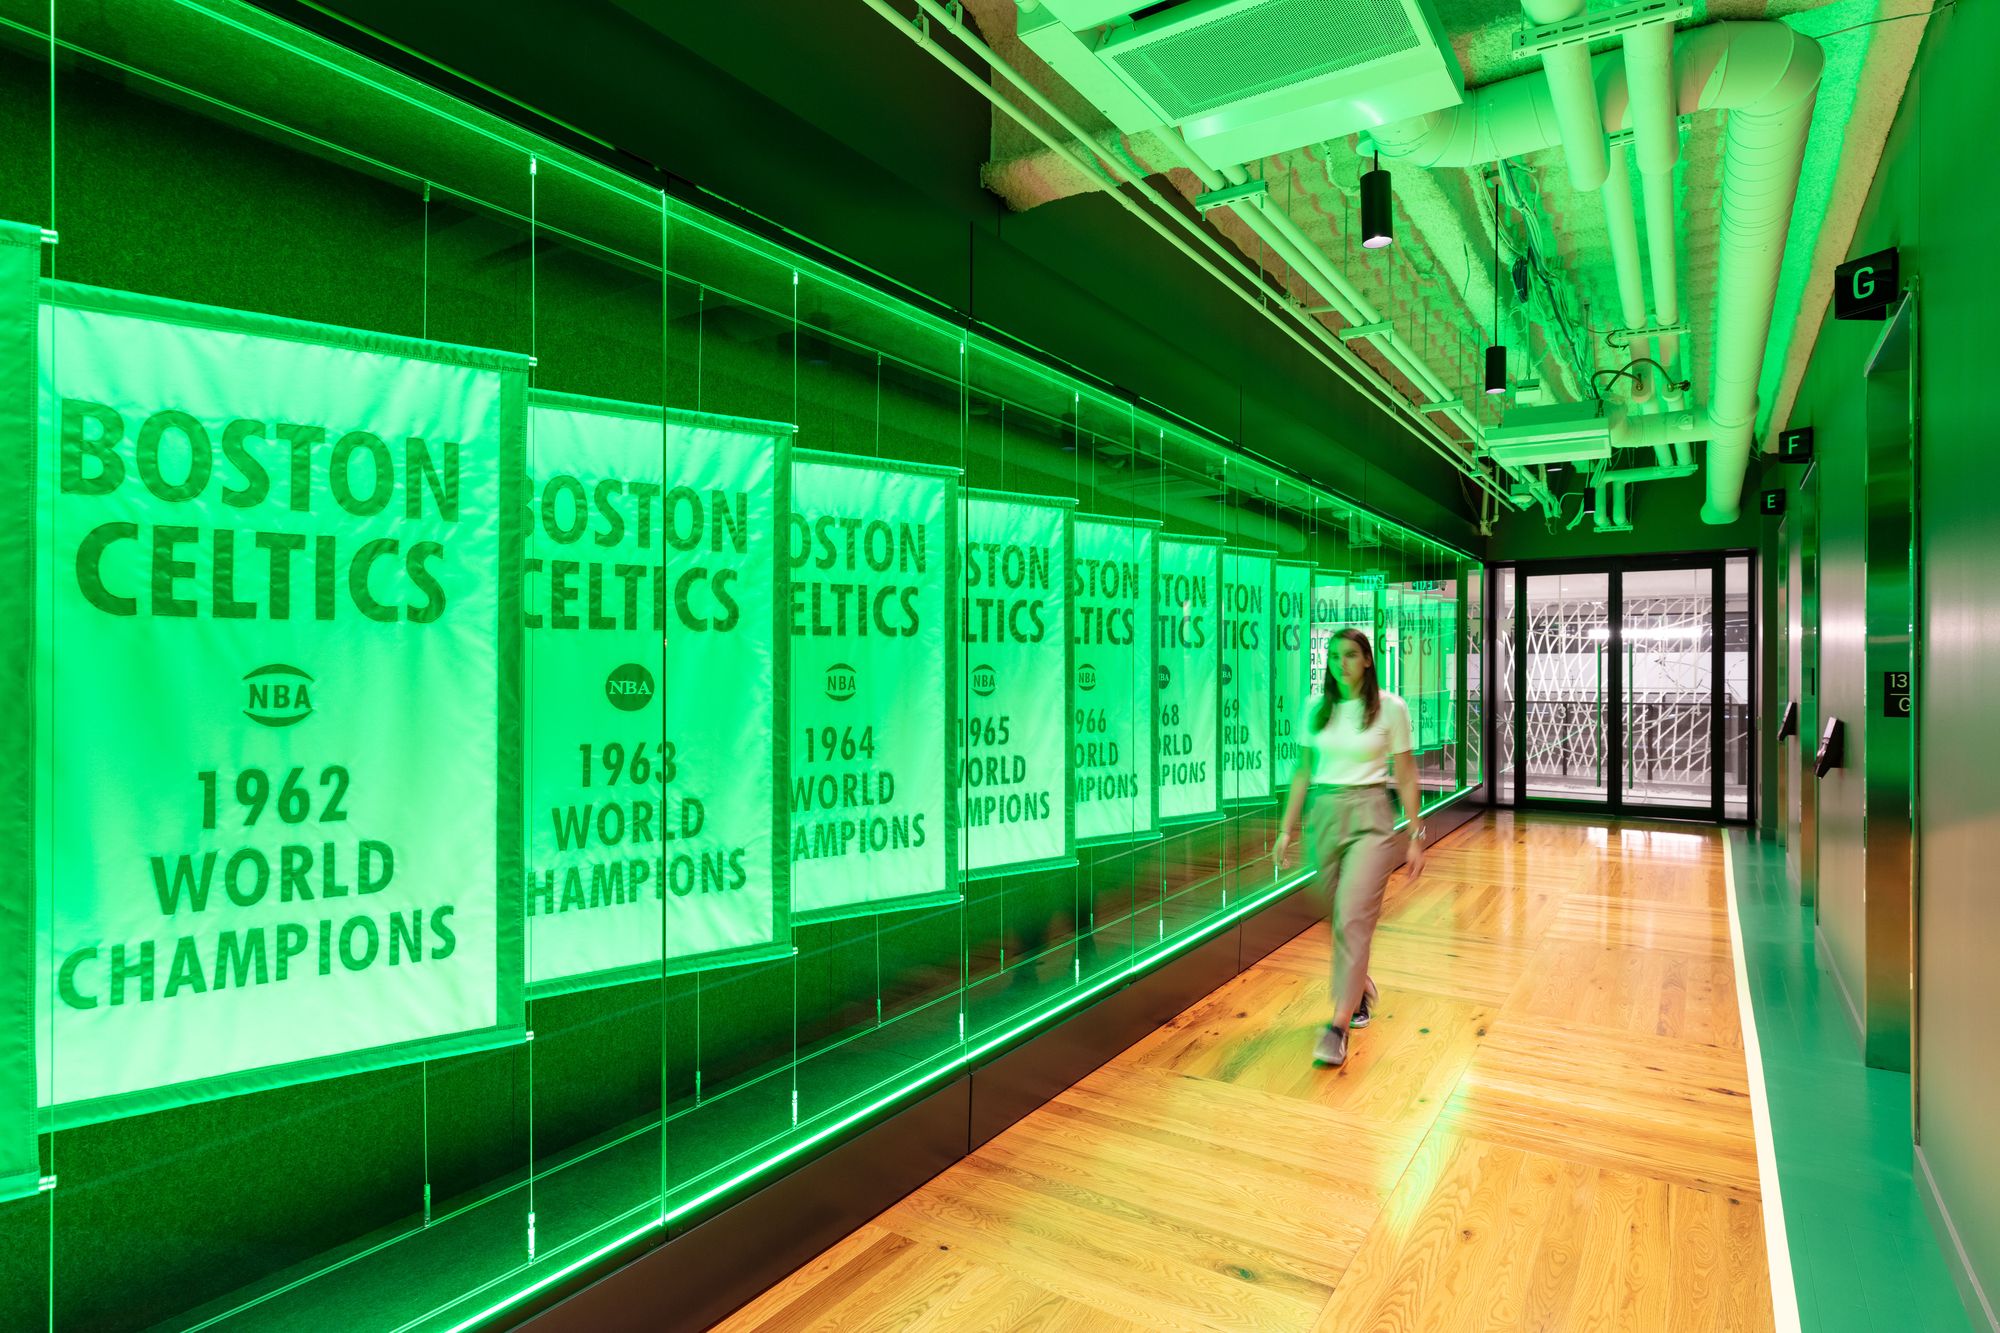 Celtics mix things up with new TD Garden center court logo